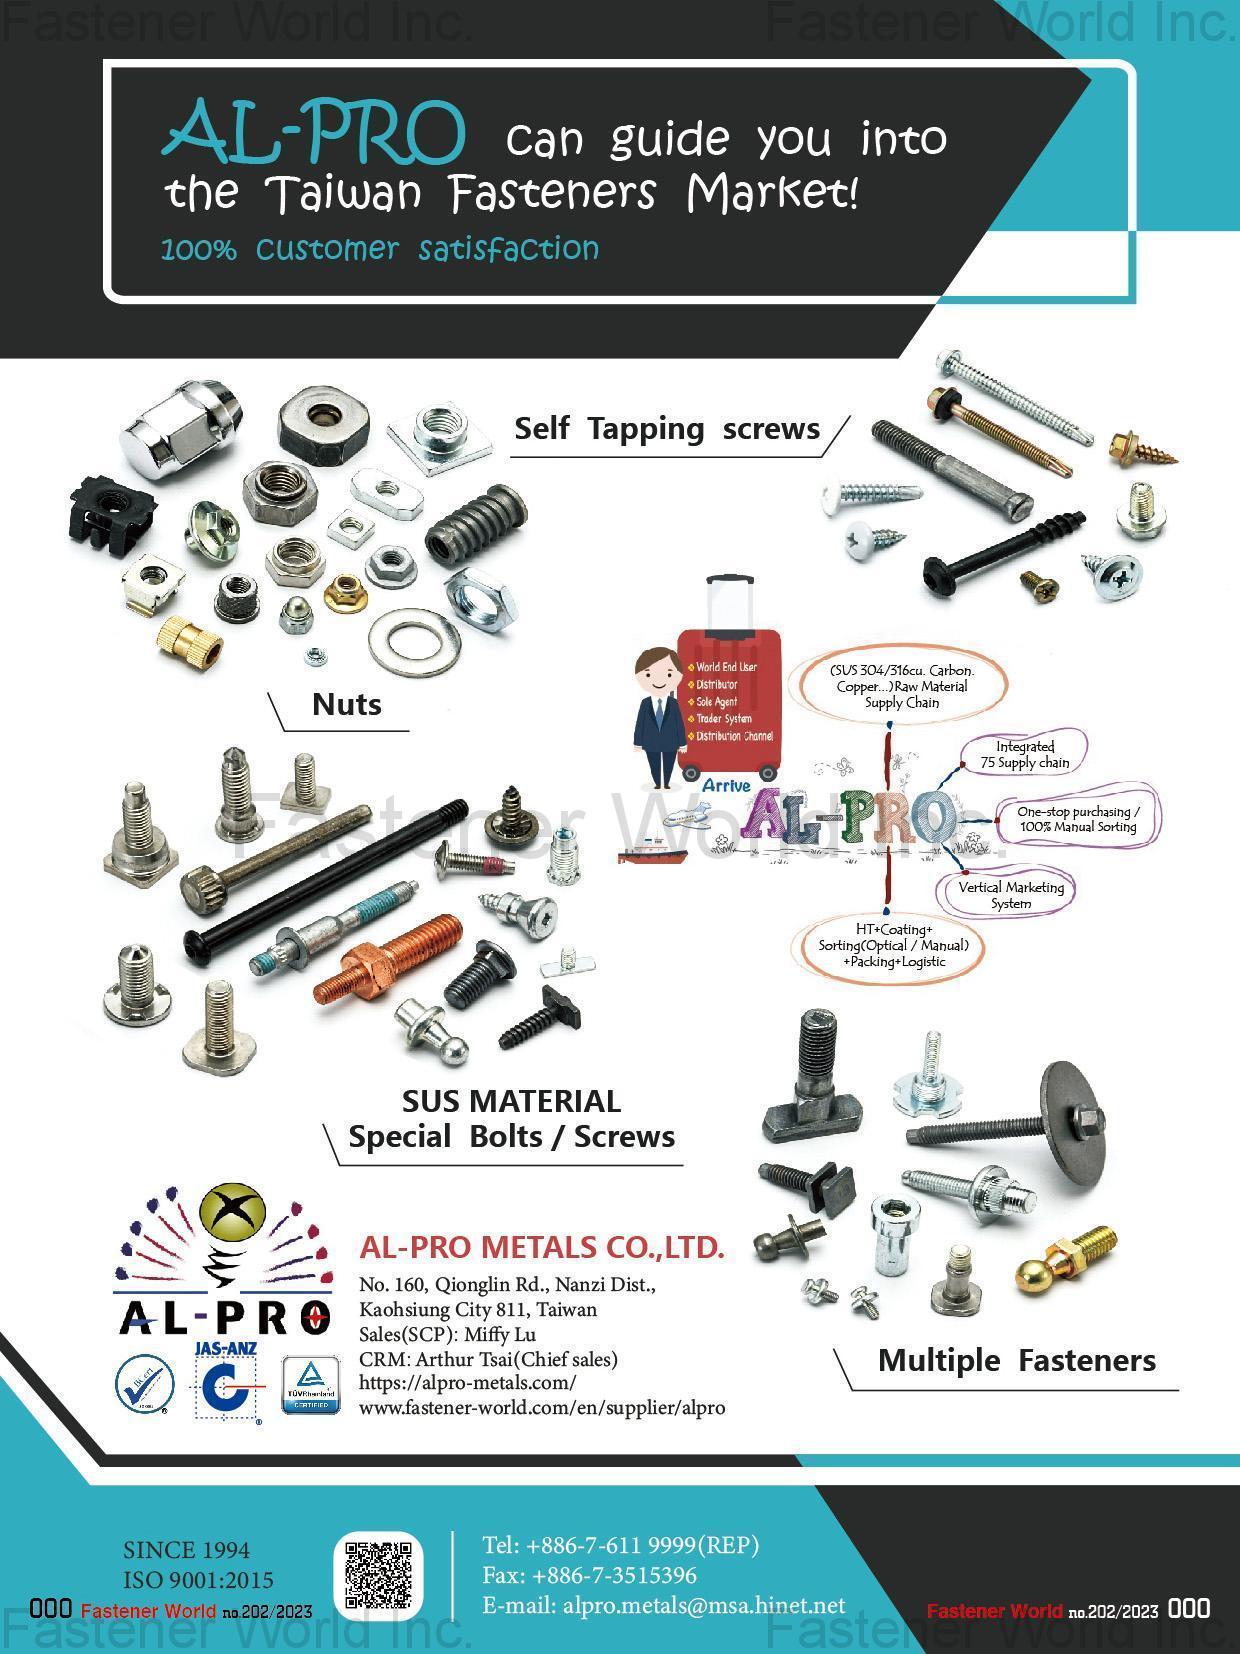 AL-PRO METALS CO., LTD. , Self Tapping Screws, Nuts, SUS Material Special Bolts / Screws, Multiple Fasteners